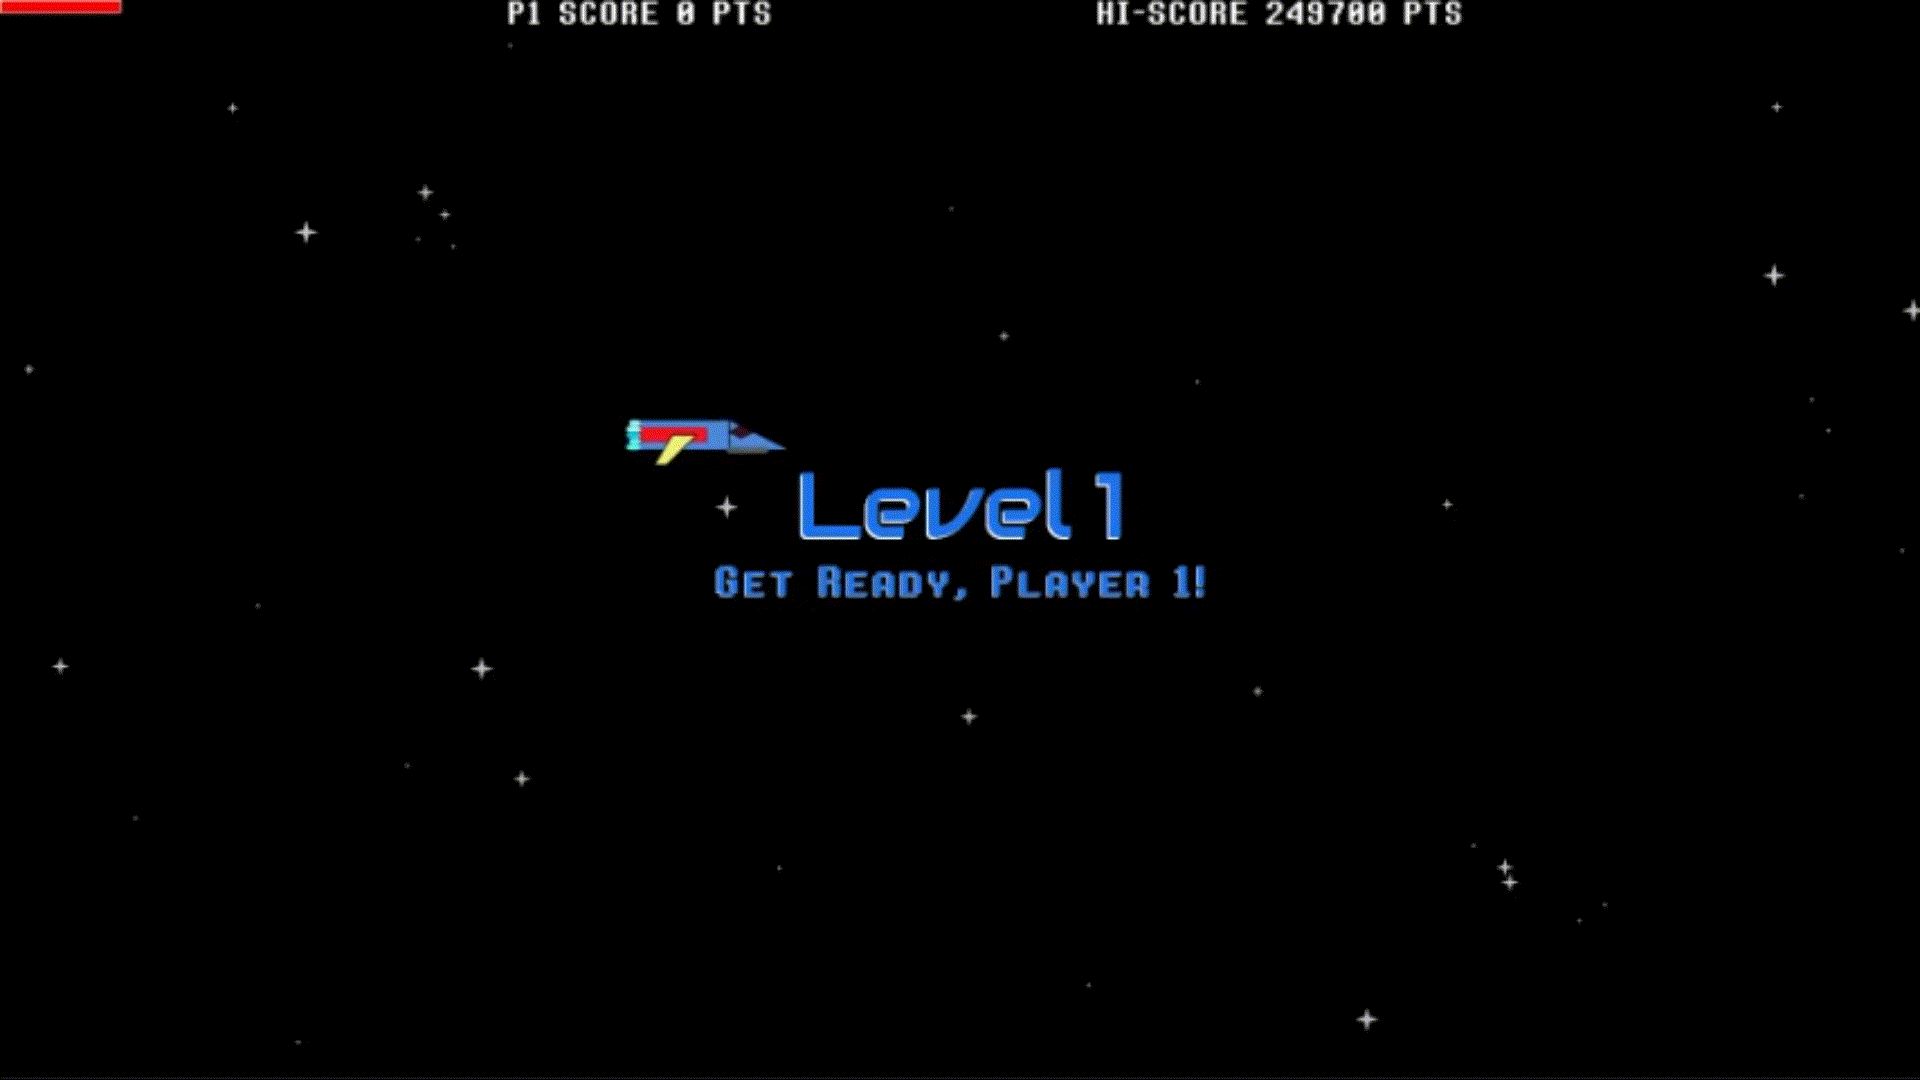 X-Type Arcade - Retro side-shooter inspired by the 80s